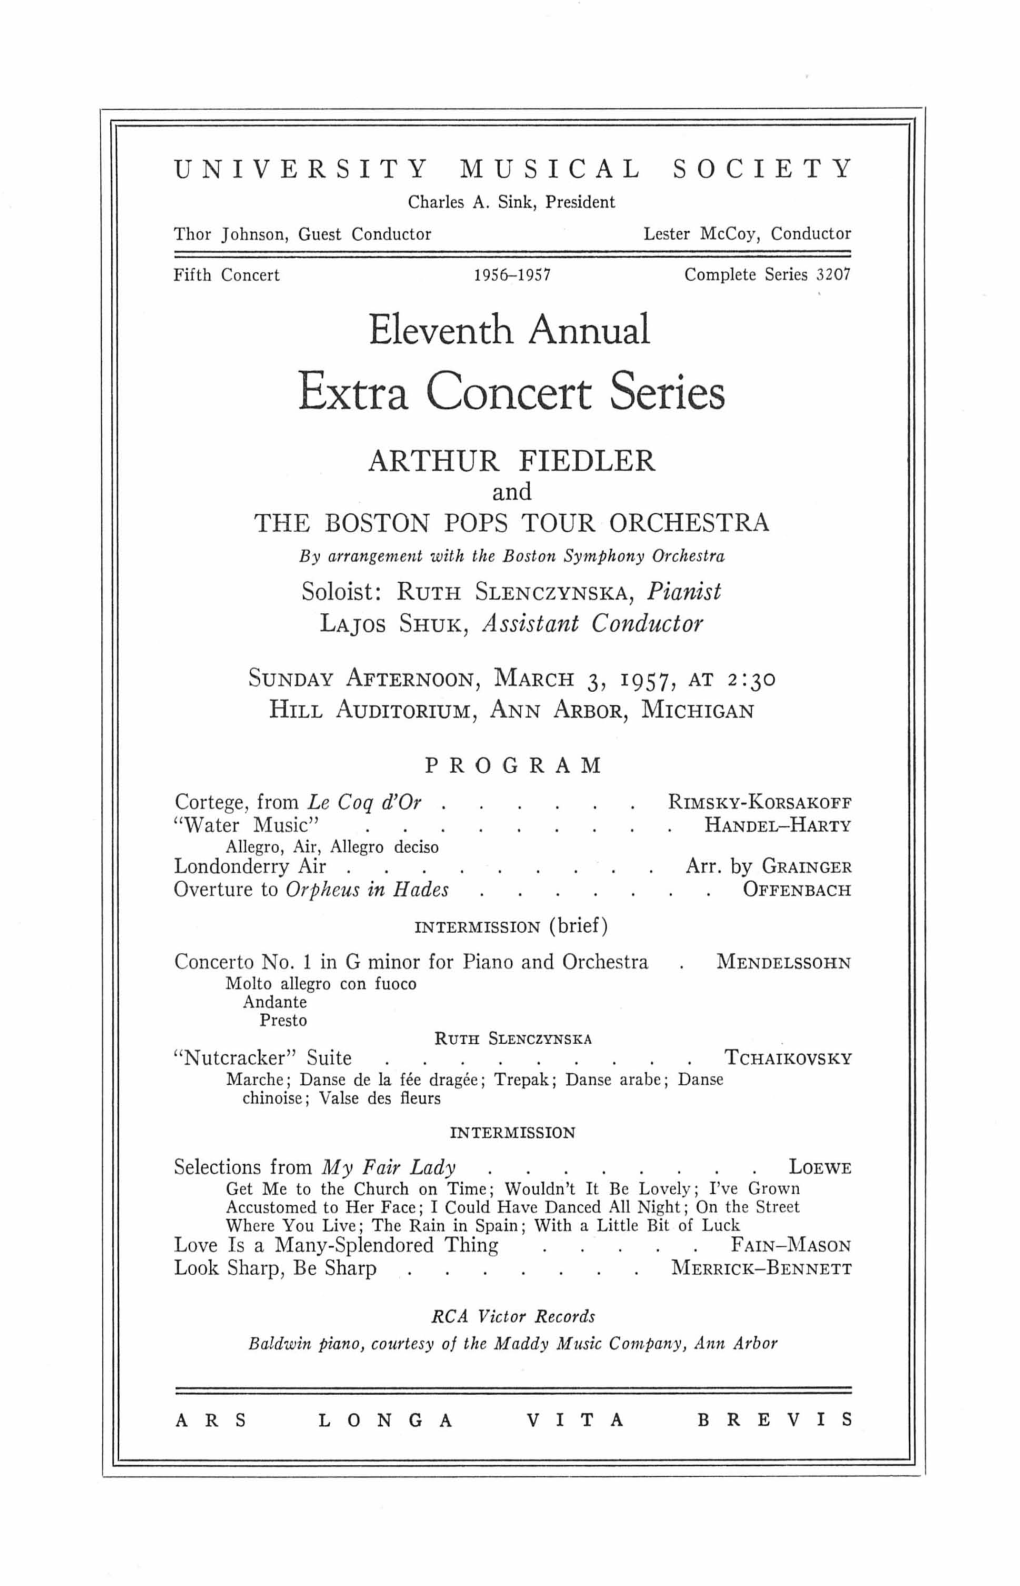 Extra Concert Series ARTHUR FIEDLER and the BOSTON POPS TOUR ORCHESTRA by Arrangement with the Boston Symphony Orchestra